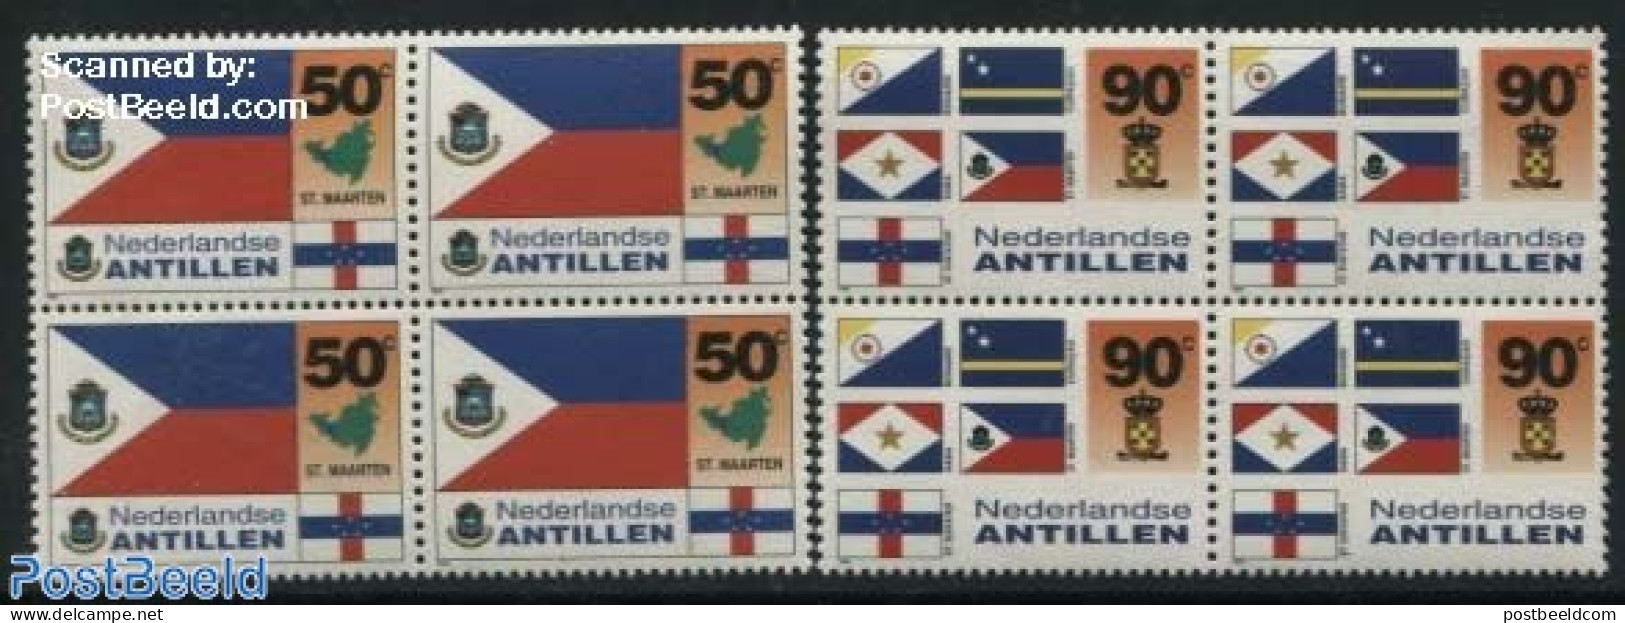 Netherlands Antilles 1995 Flags 2v, Red/blue In St Martin Flag Exchanged, Blocks Of 4, Mint NH, History - Various - Fl.. - Fehldrucke